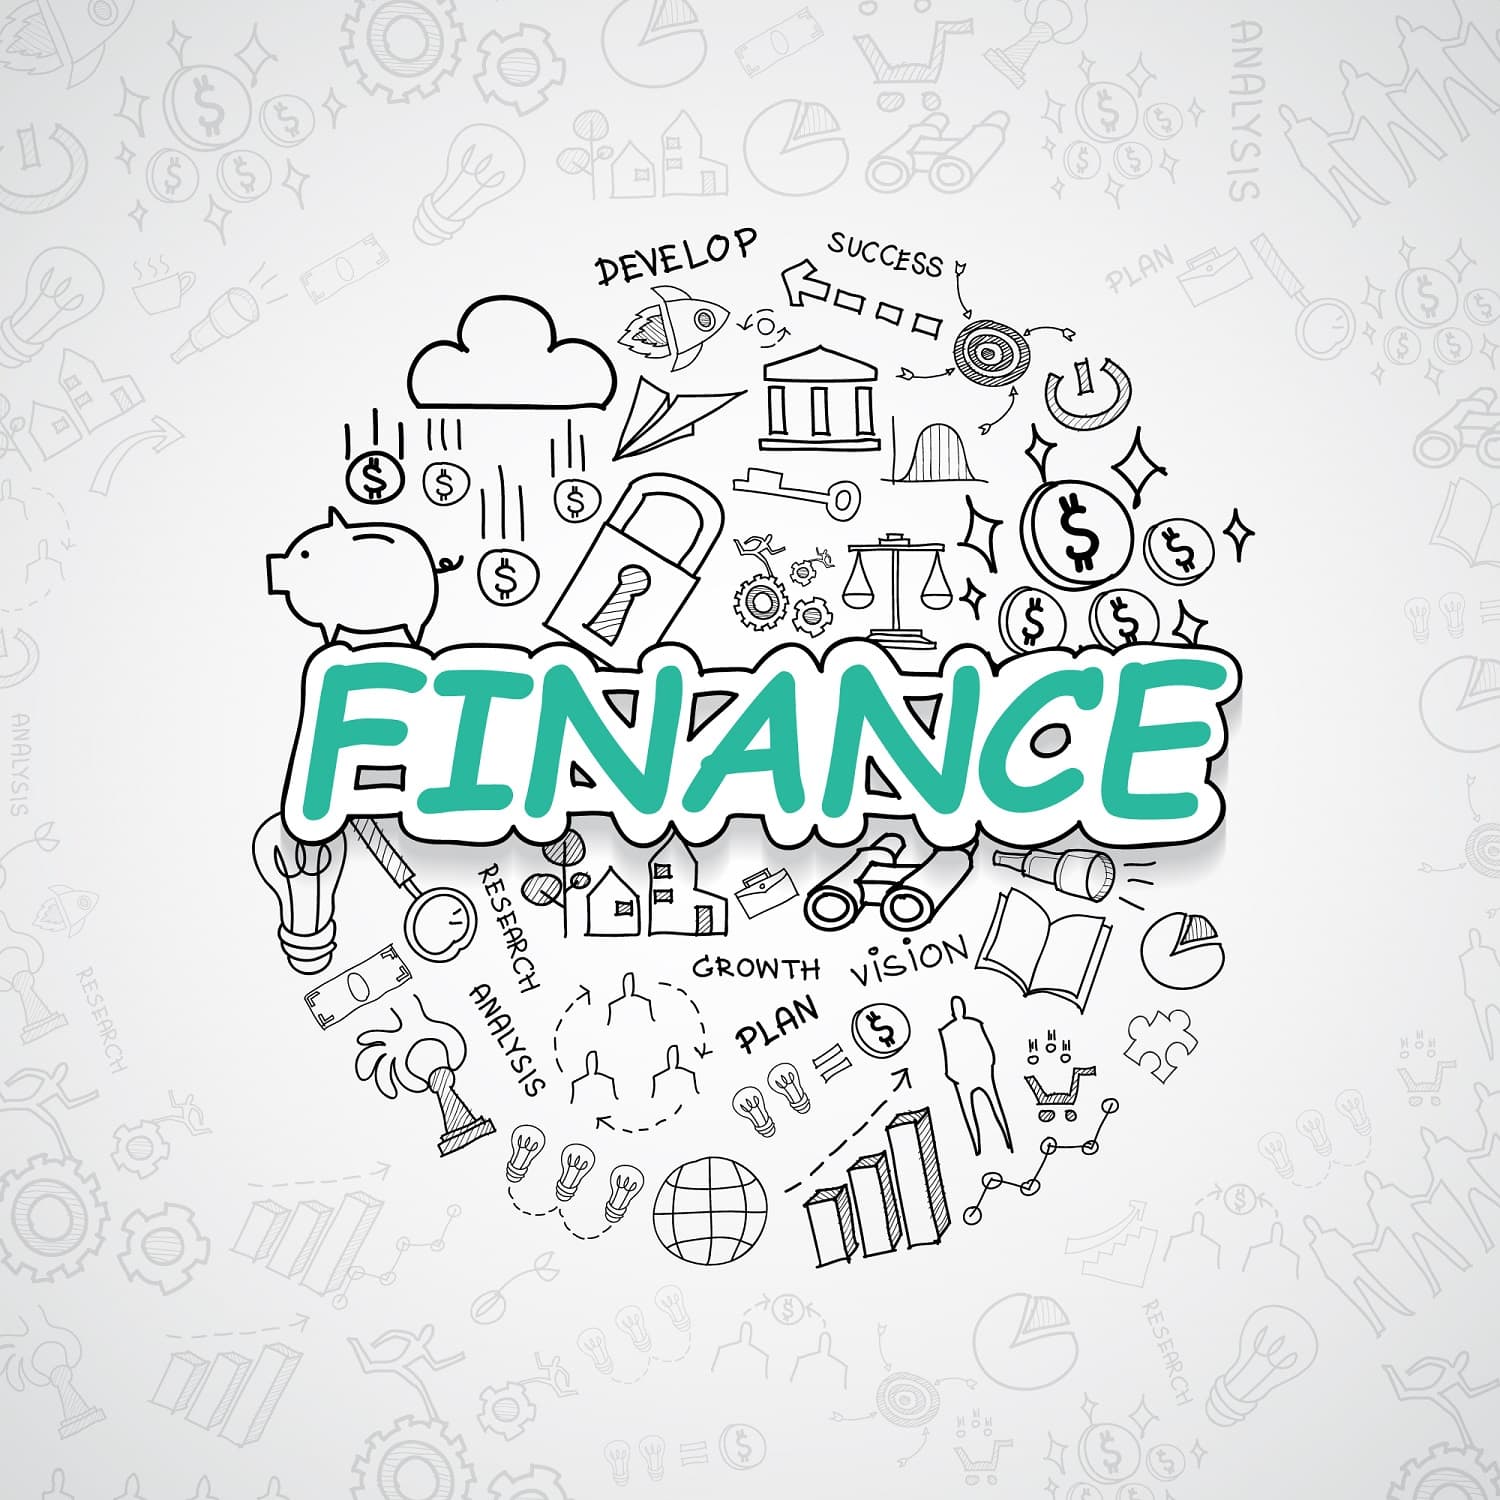 Invoice Financing: A Guide to Unlocking Working Capital (9)